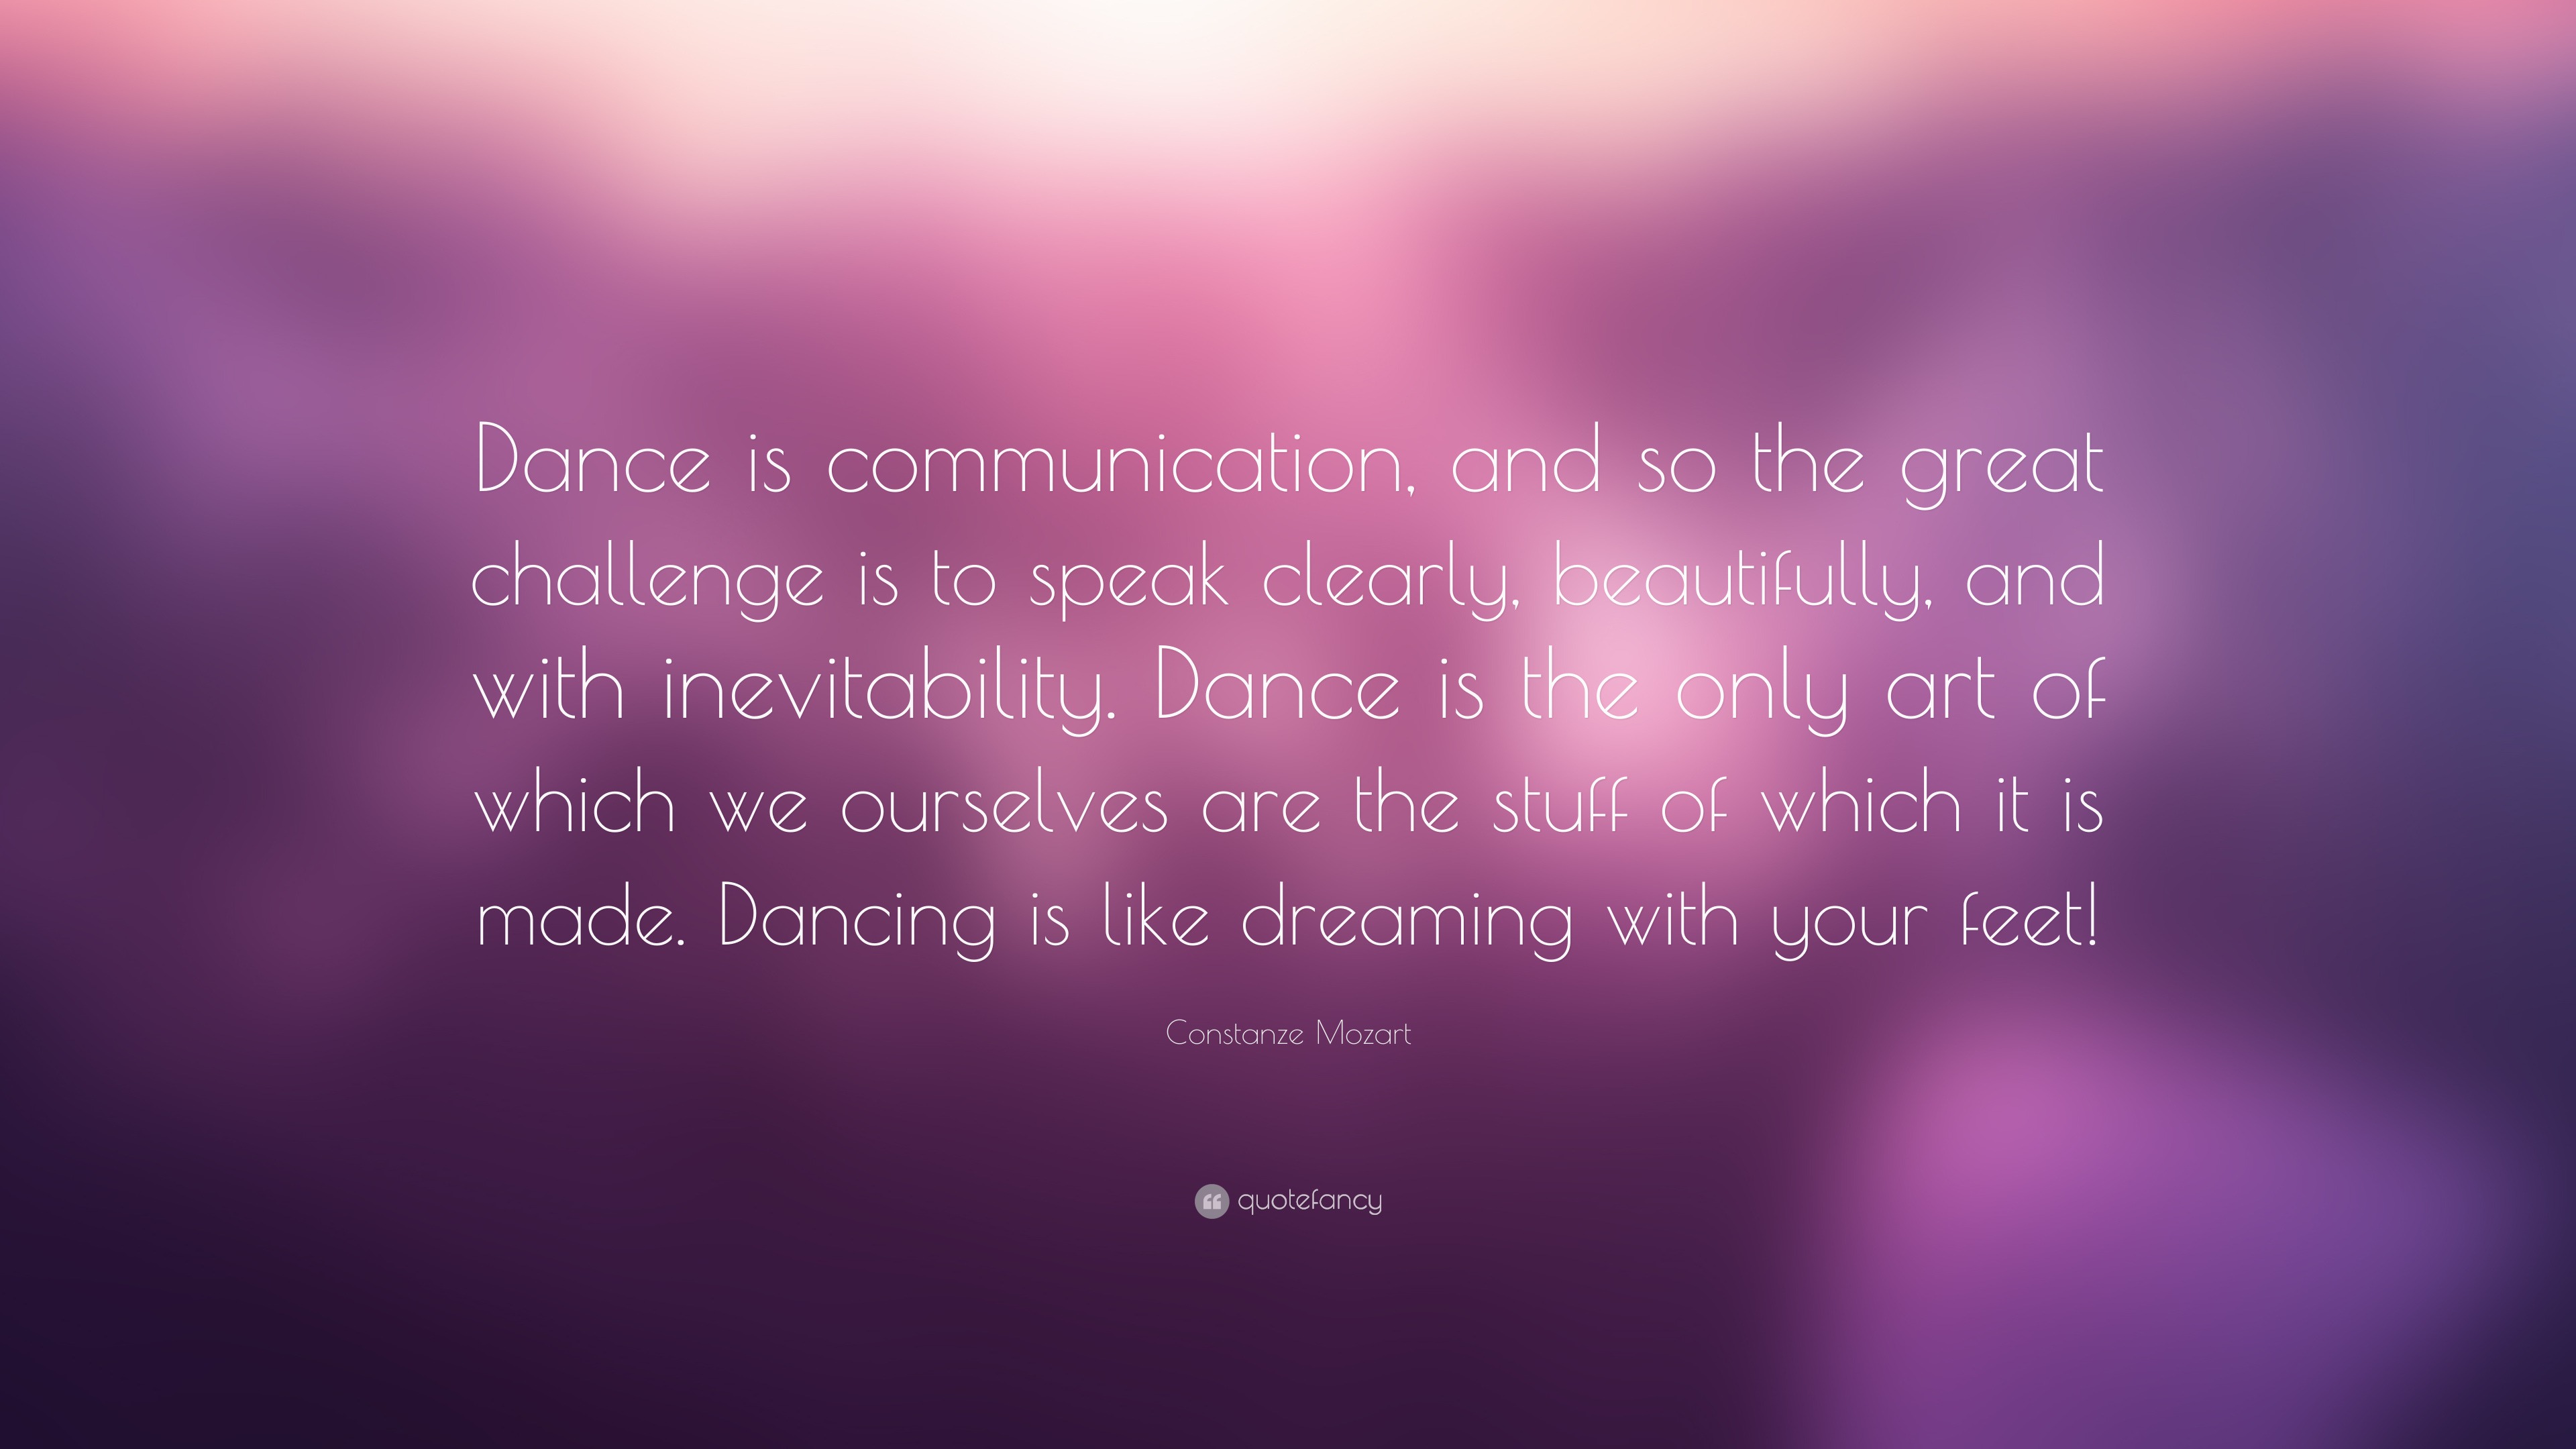 Constanze Mozart Quote: “Dance is communication, and so the great